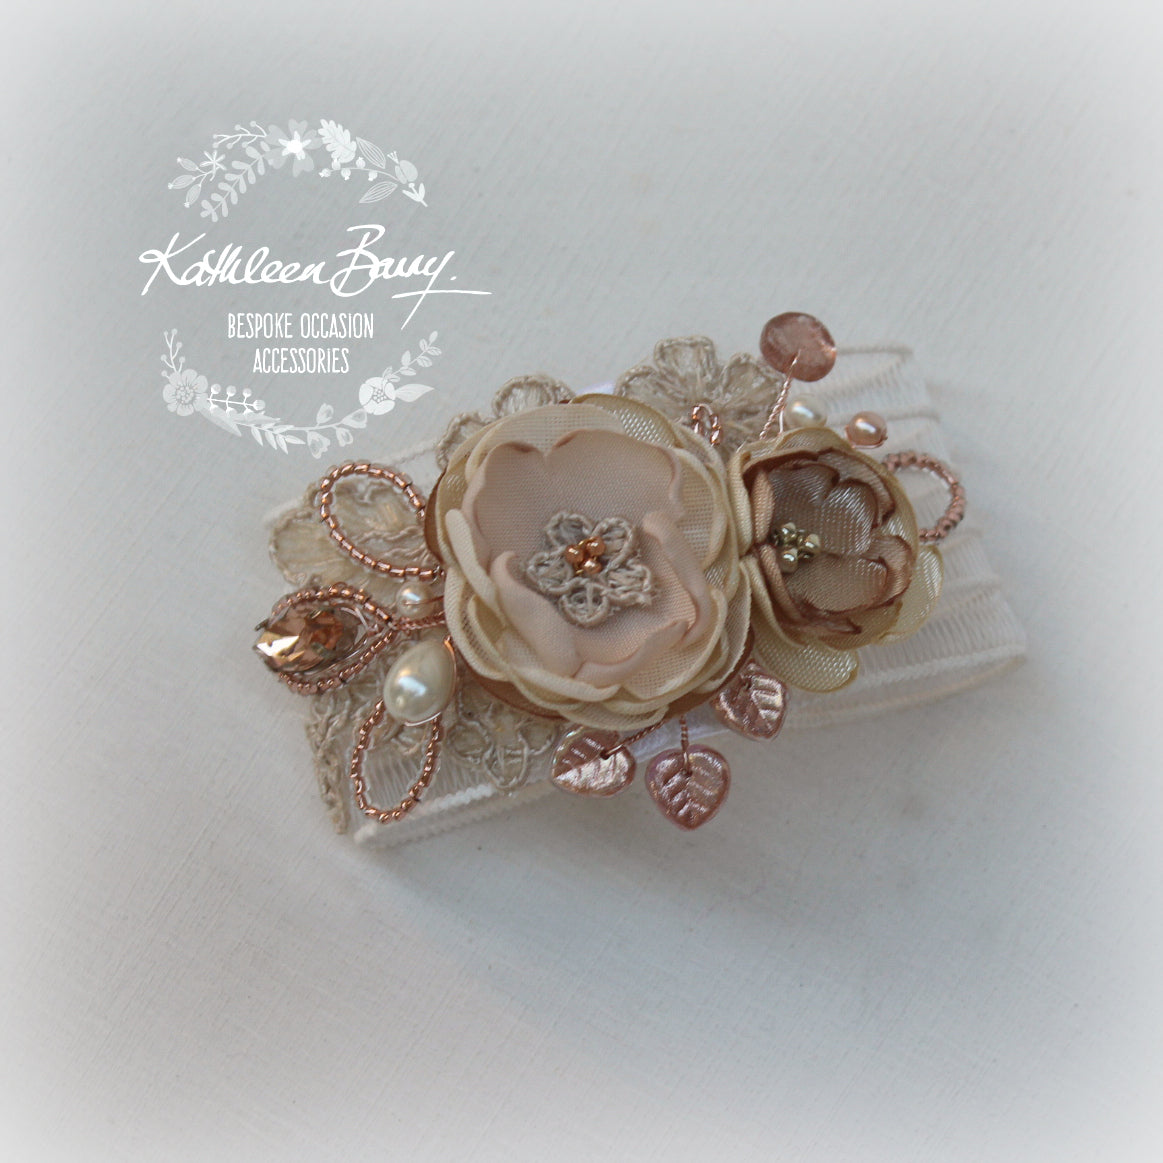 Jeanine wrist corsage cuff bracelet - Rose gold, gold or silver finish (colors on request)